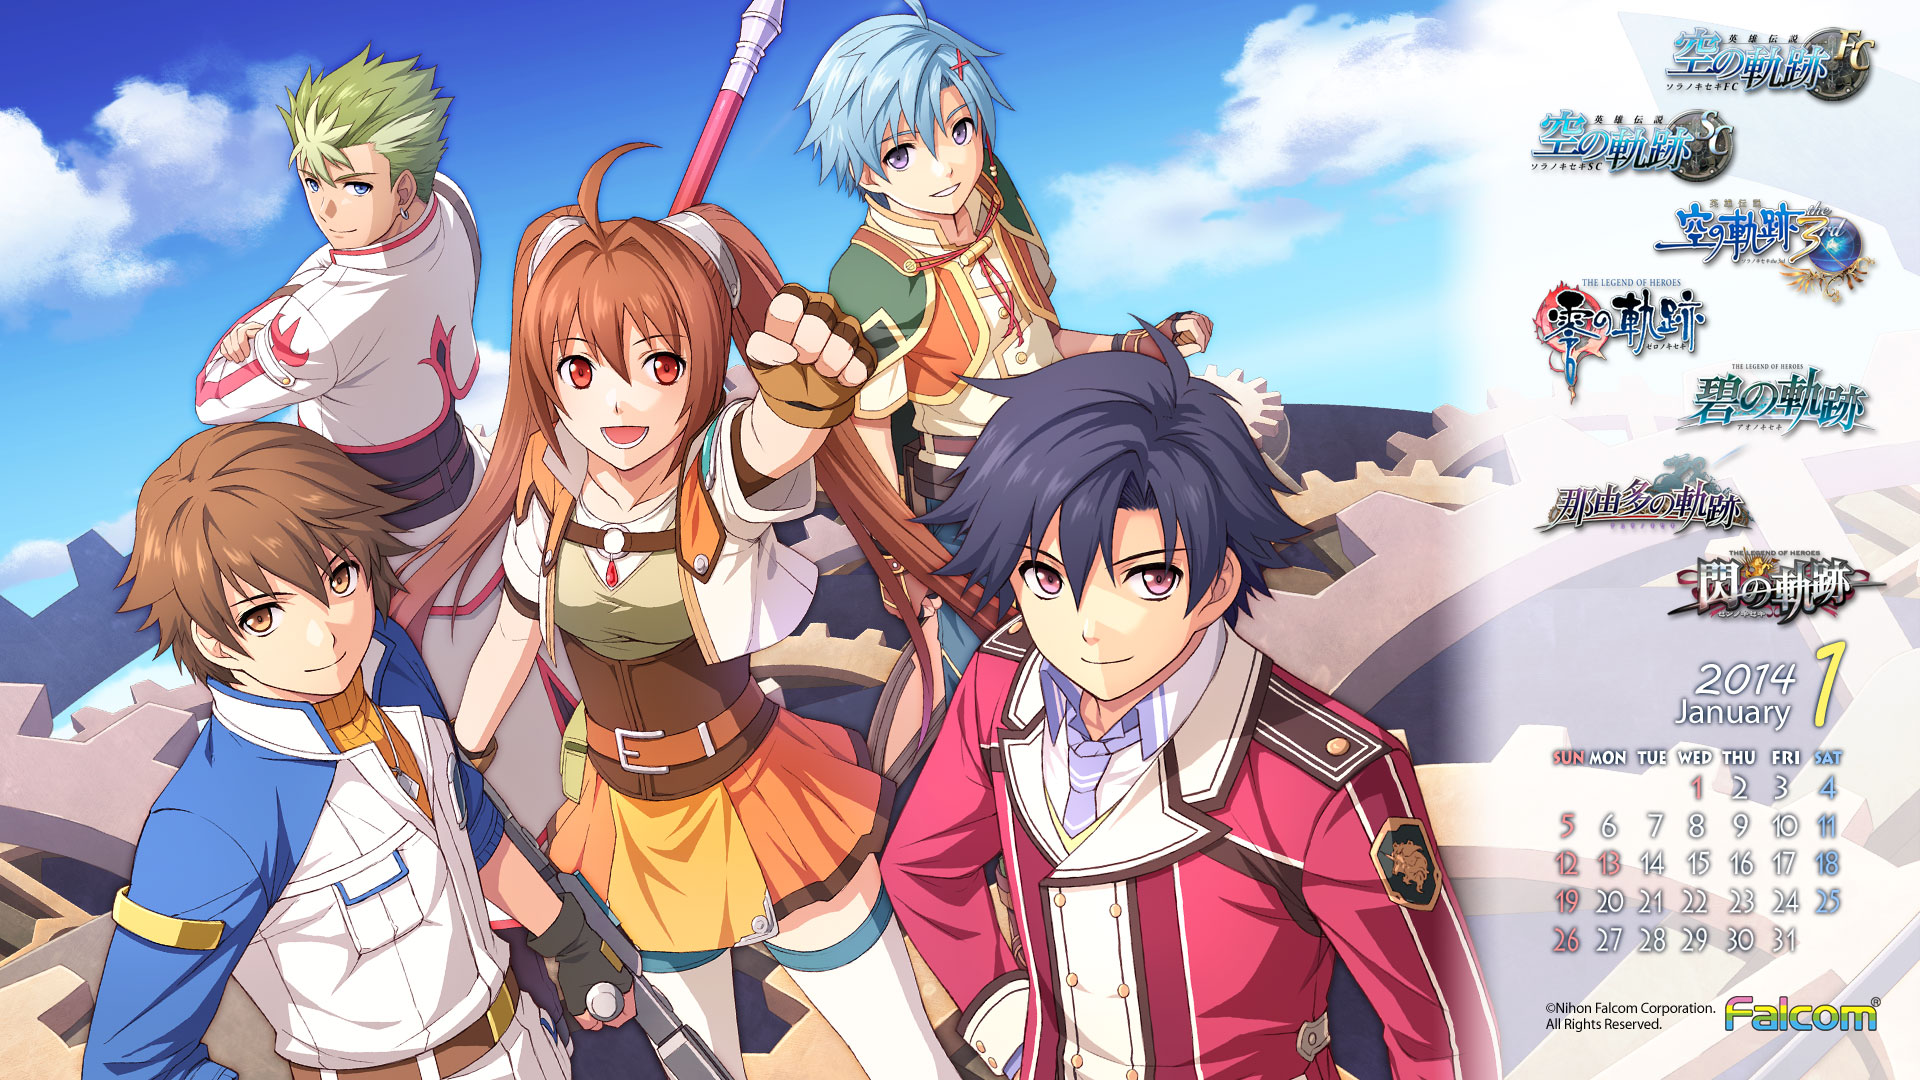 Valkirian skyes 1.20 1. The Legend of Heroes: Trails in the Sky. Trails in the Sky 1. The Legend of Heroes: Trails in the Sky (2014).